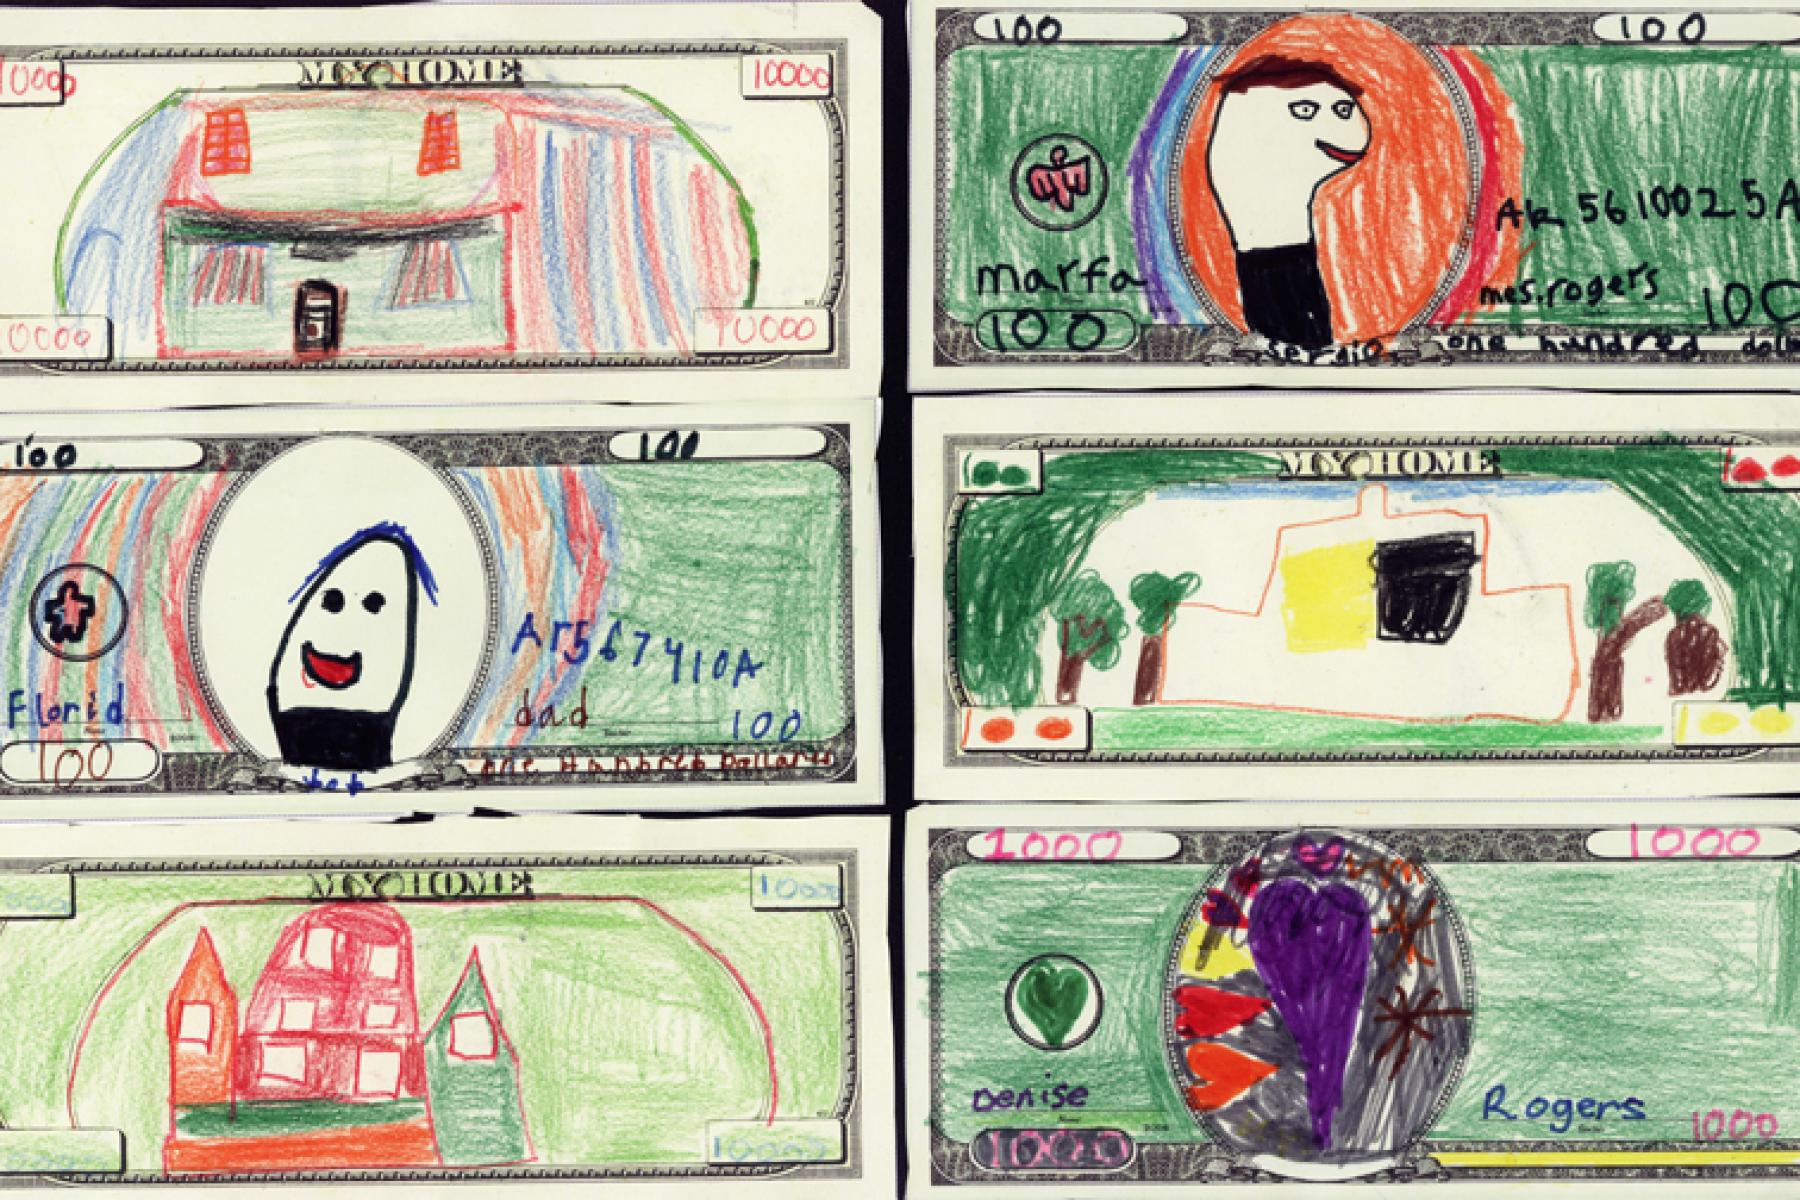 Fundred Dollar bills designed by Marfa students